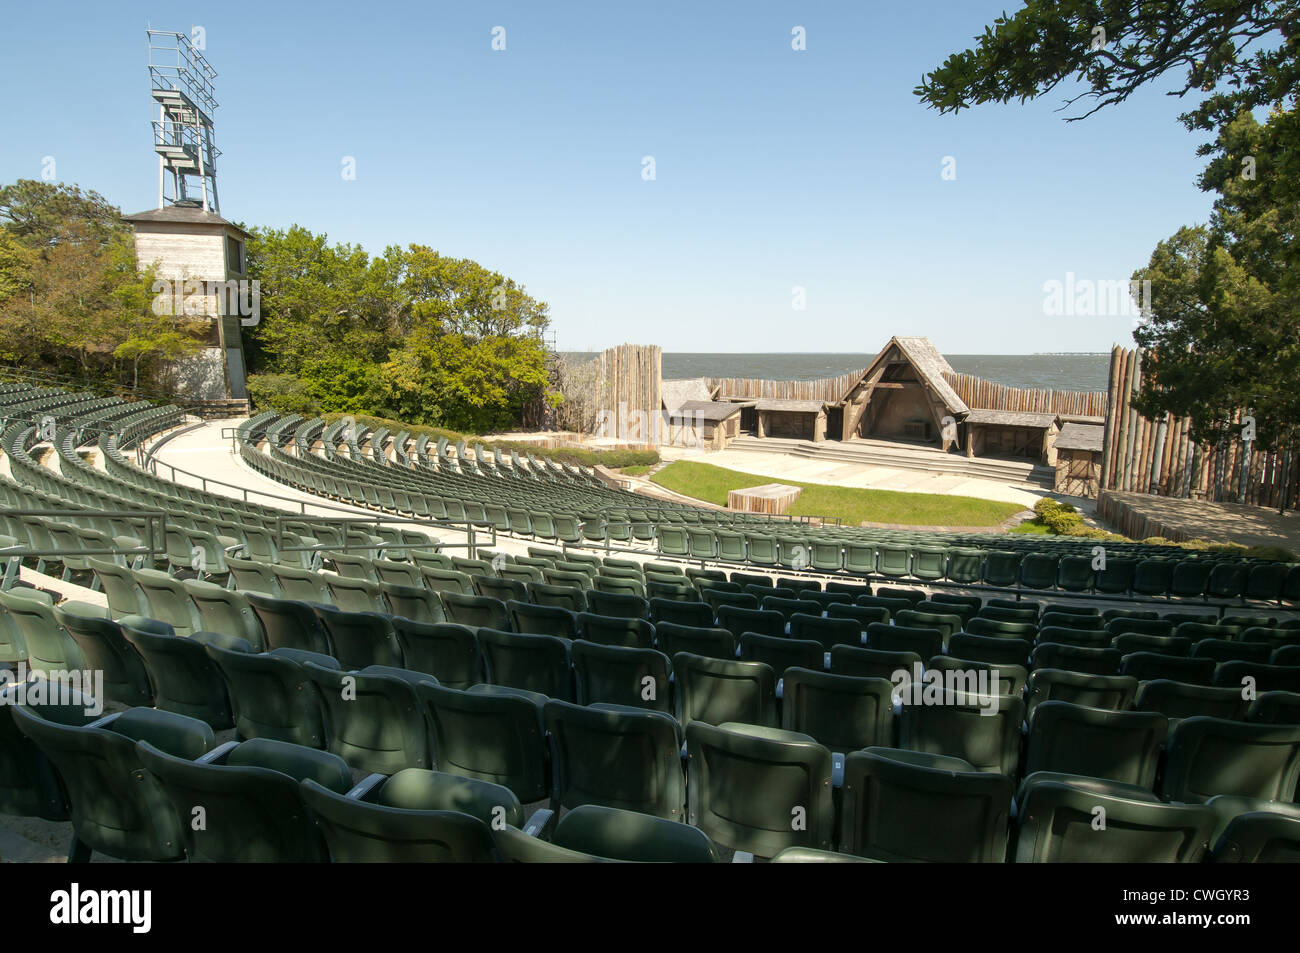 The Lost Colony outdoor drama play Historic Waterfront Theater Manteo Roanoke Island North Carolina Outer Banks Stock Photo